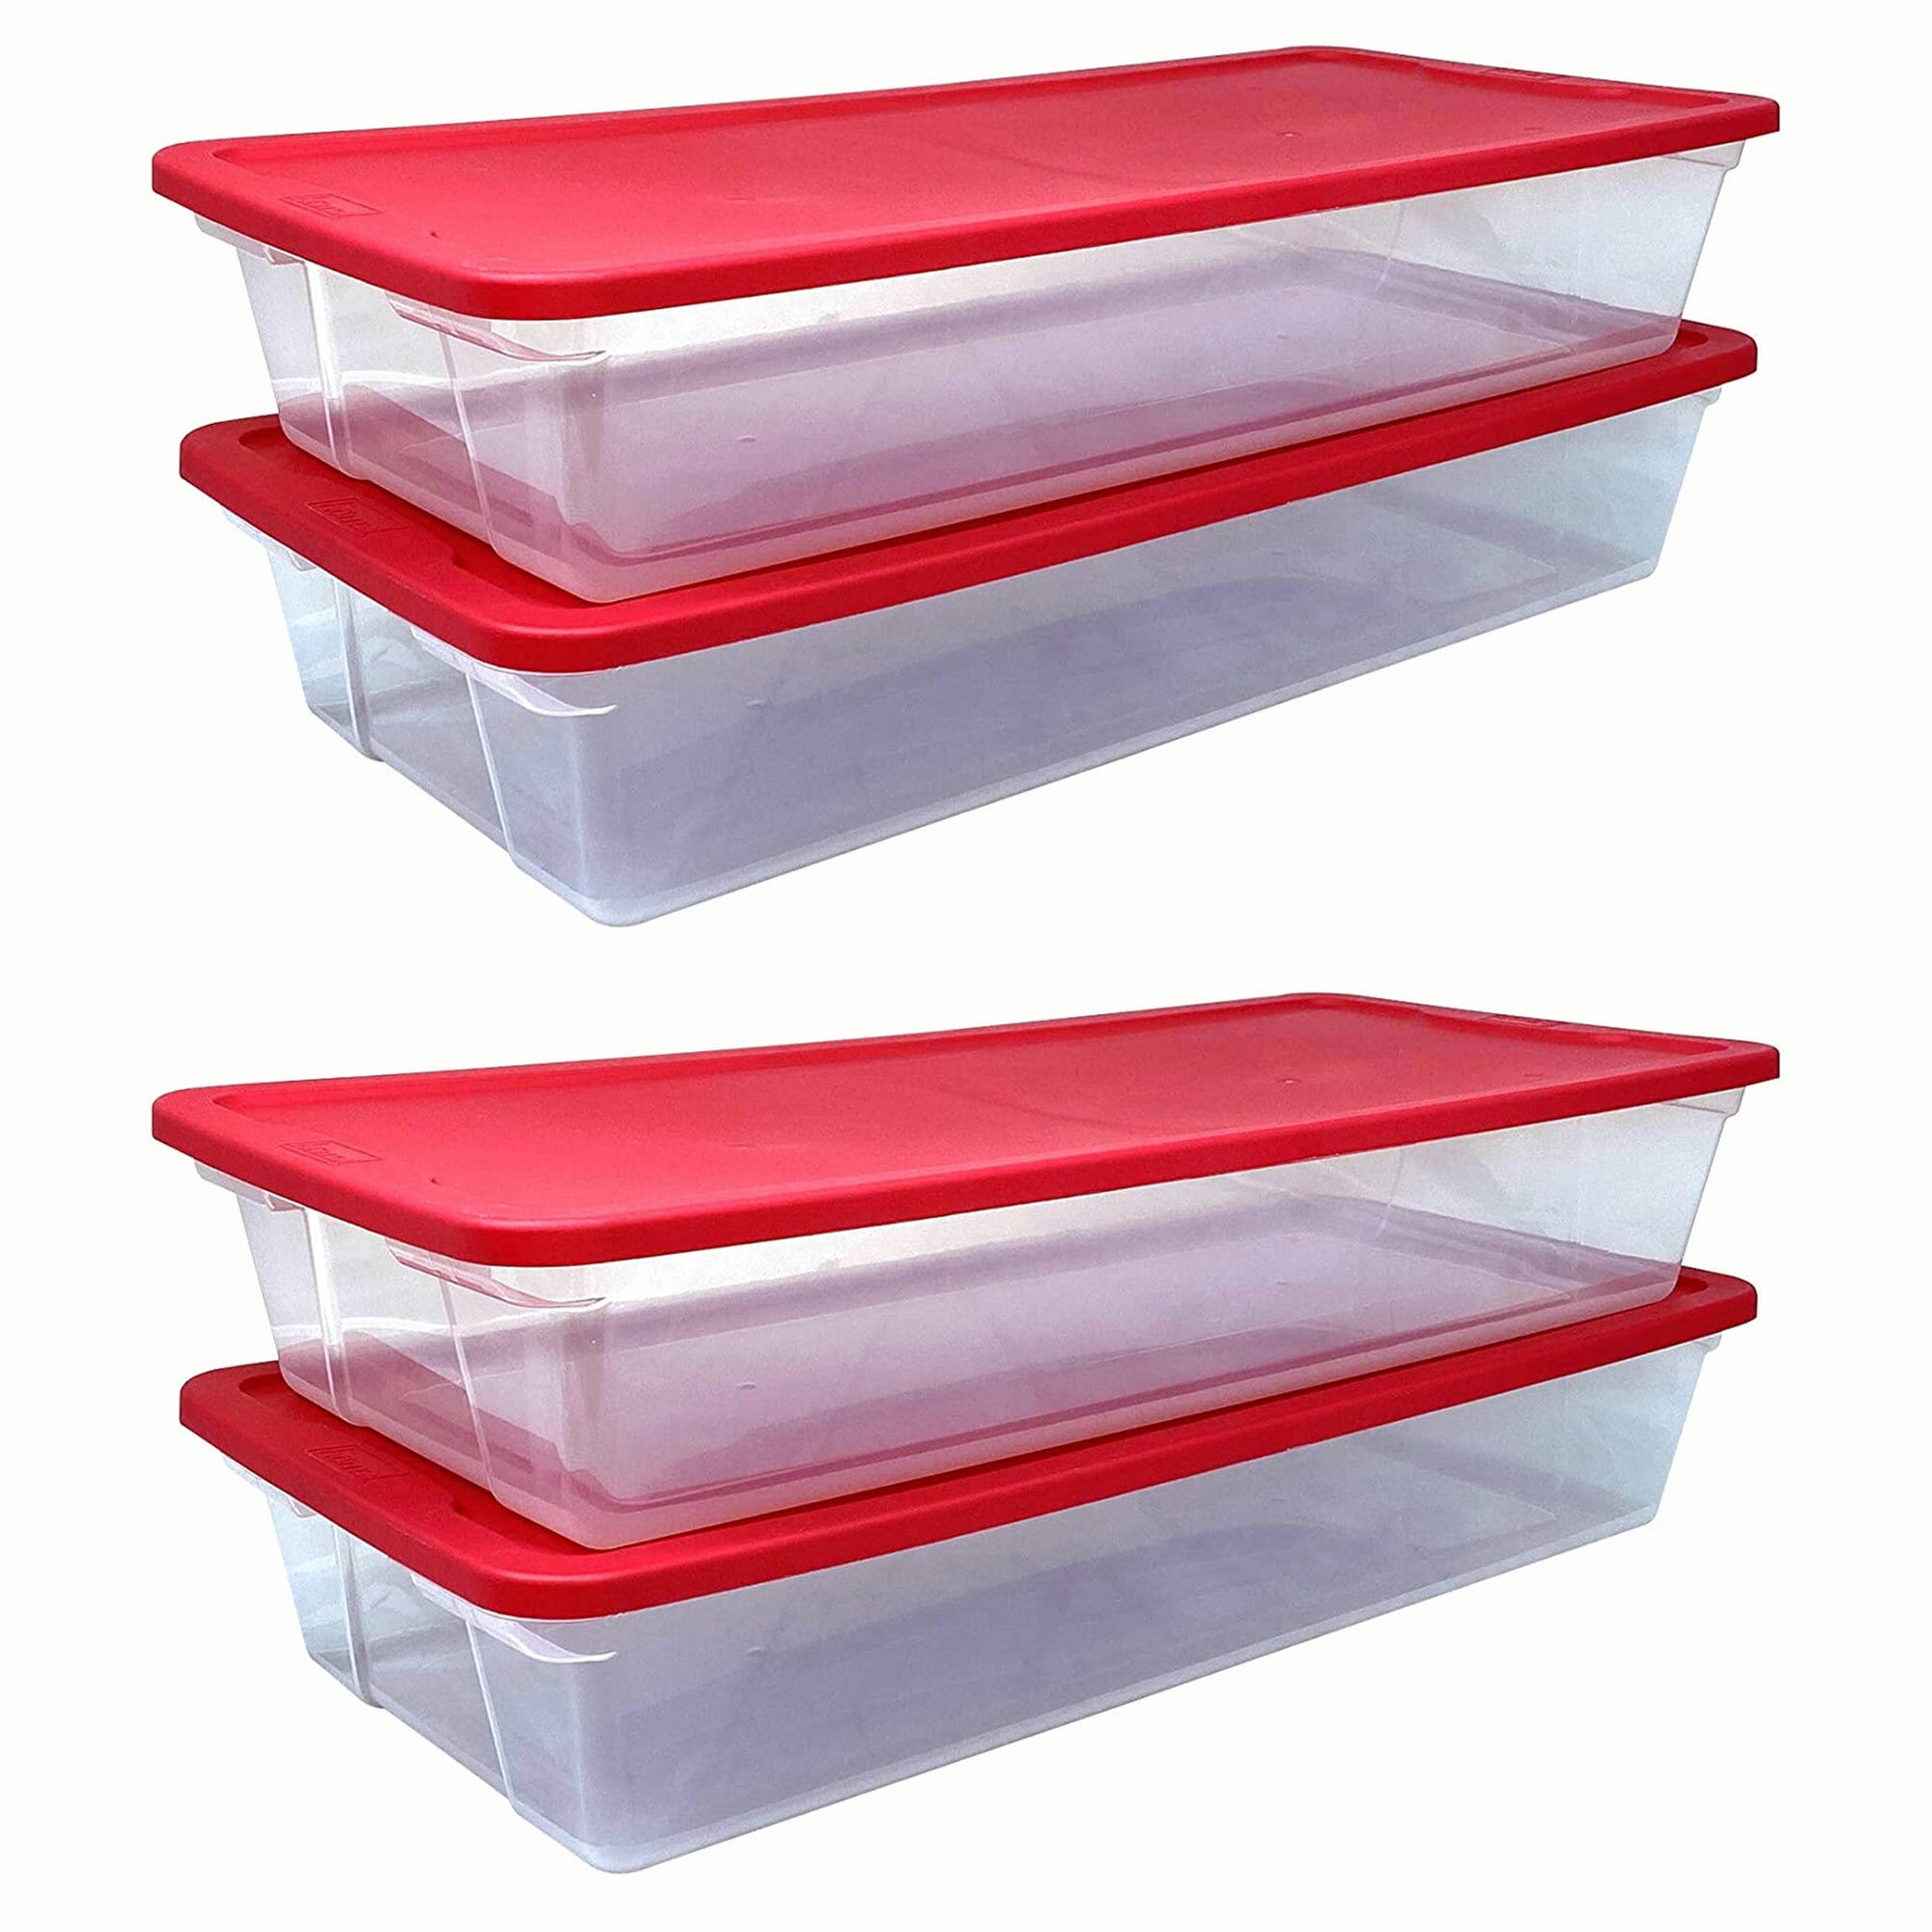 Neadas 6 Quart Plastic Storage Containers with Lids and Handles, 6 Packs